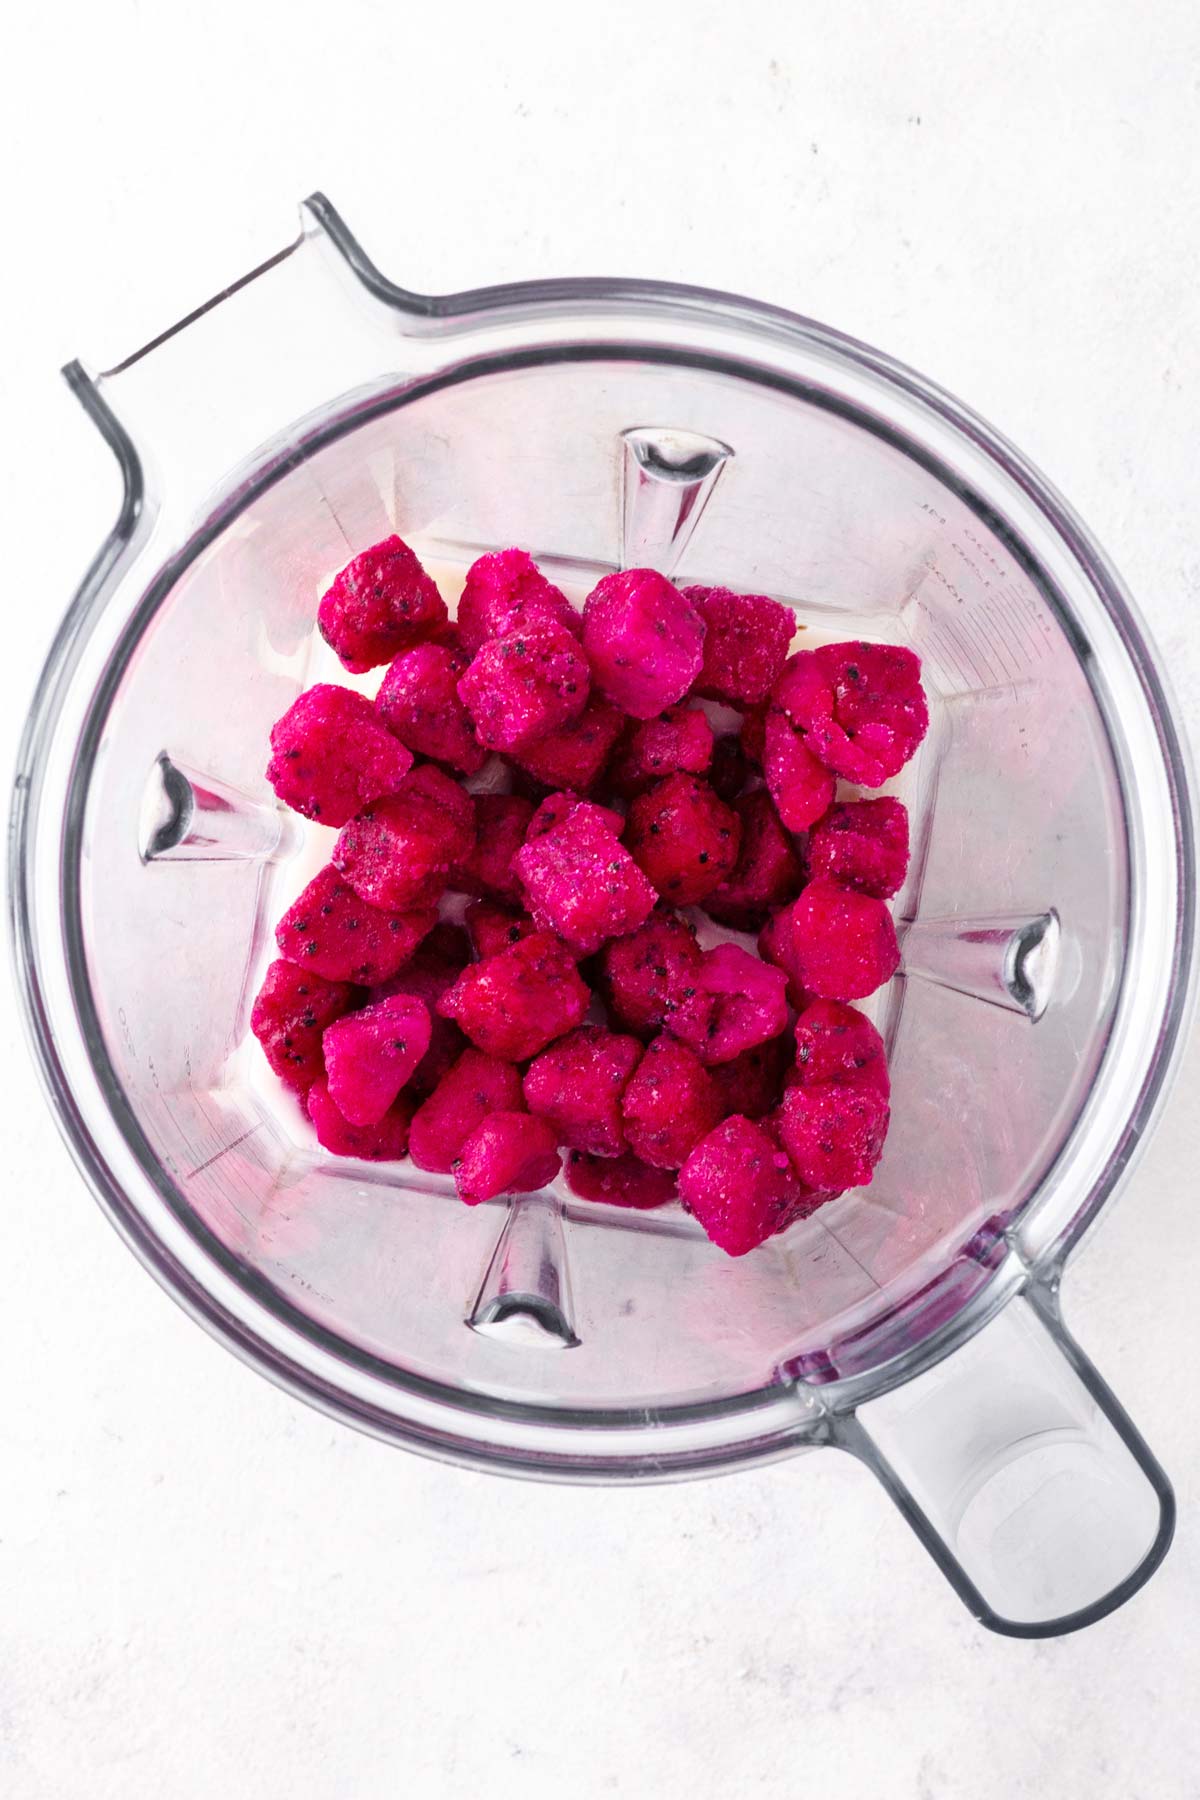 Ingredients for a dragon fruit smoothie in a blender.